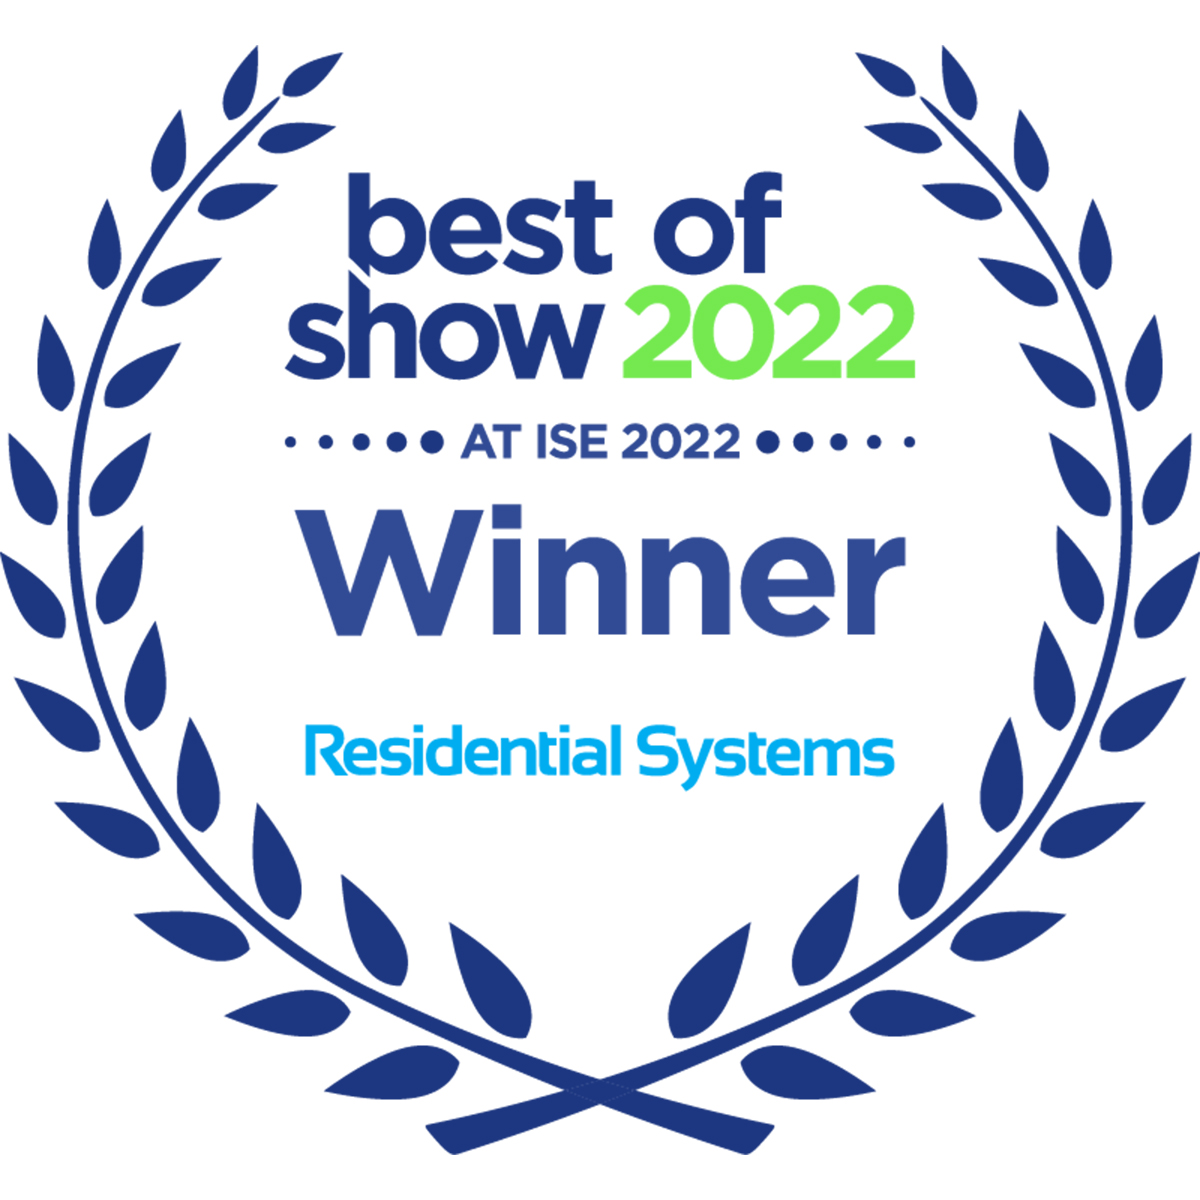 Residential Systems “Best of Show” at ISE